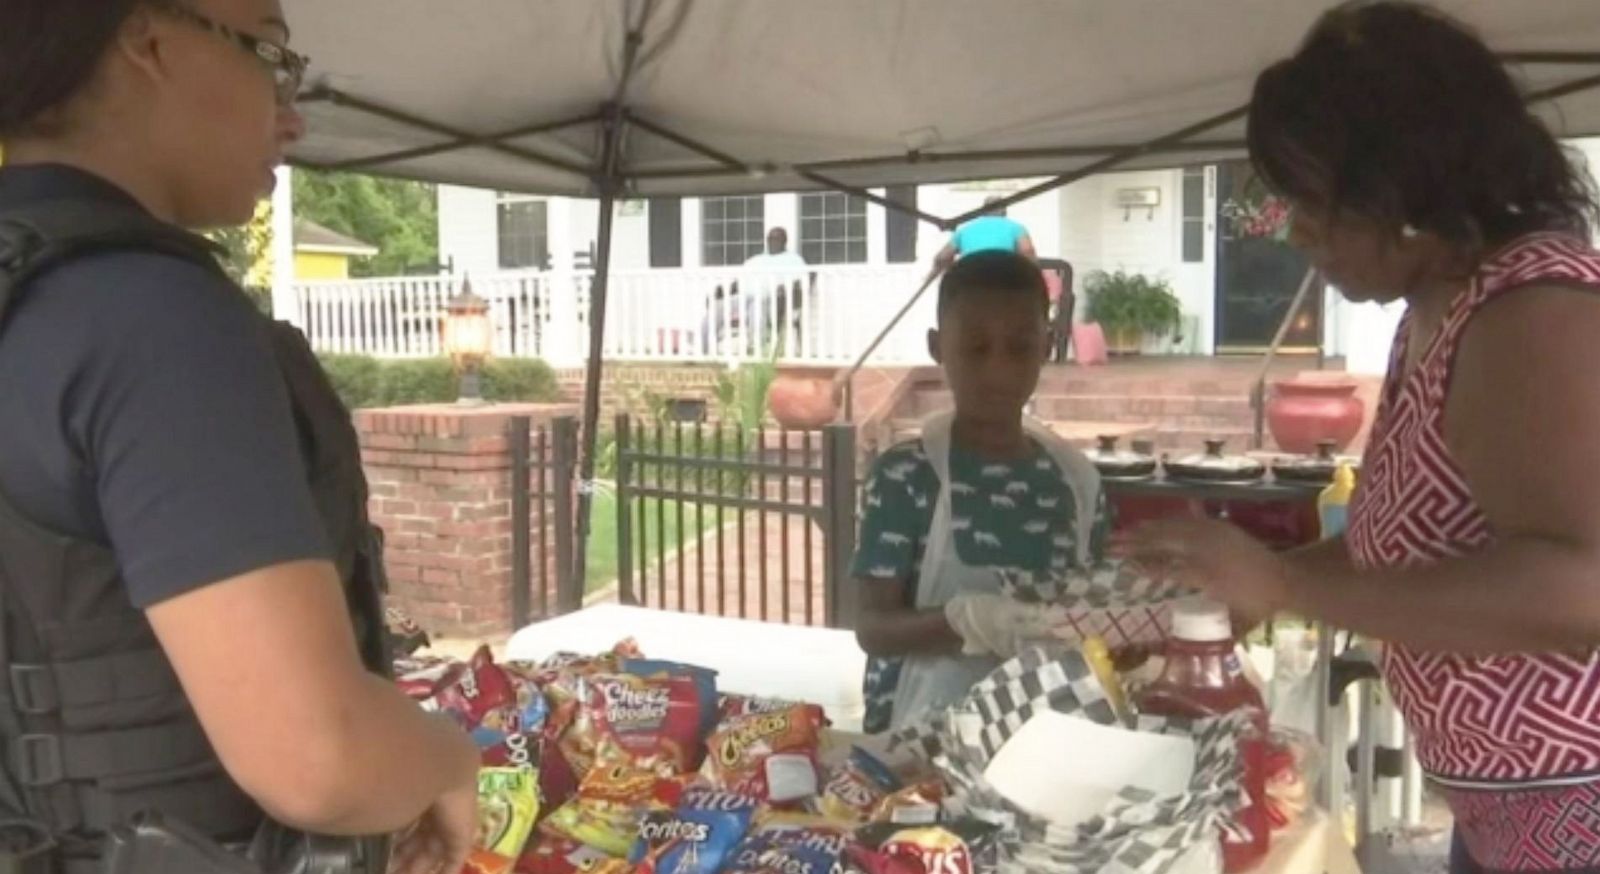 Instead of Using Birthday Money for Disney World Vacation, 6-Year-old Uses It to Feed Hurricane Evacuees